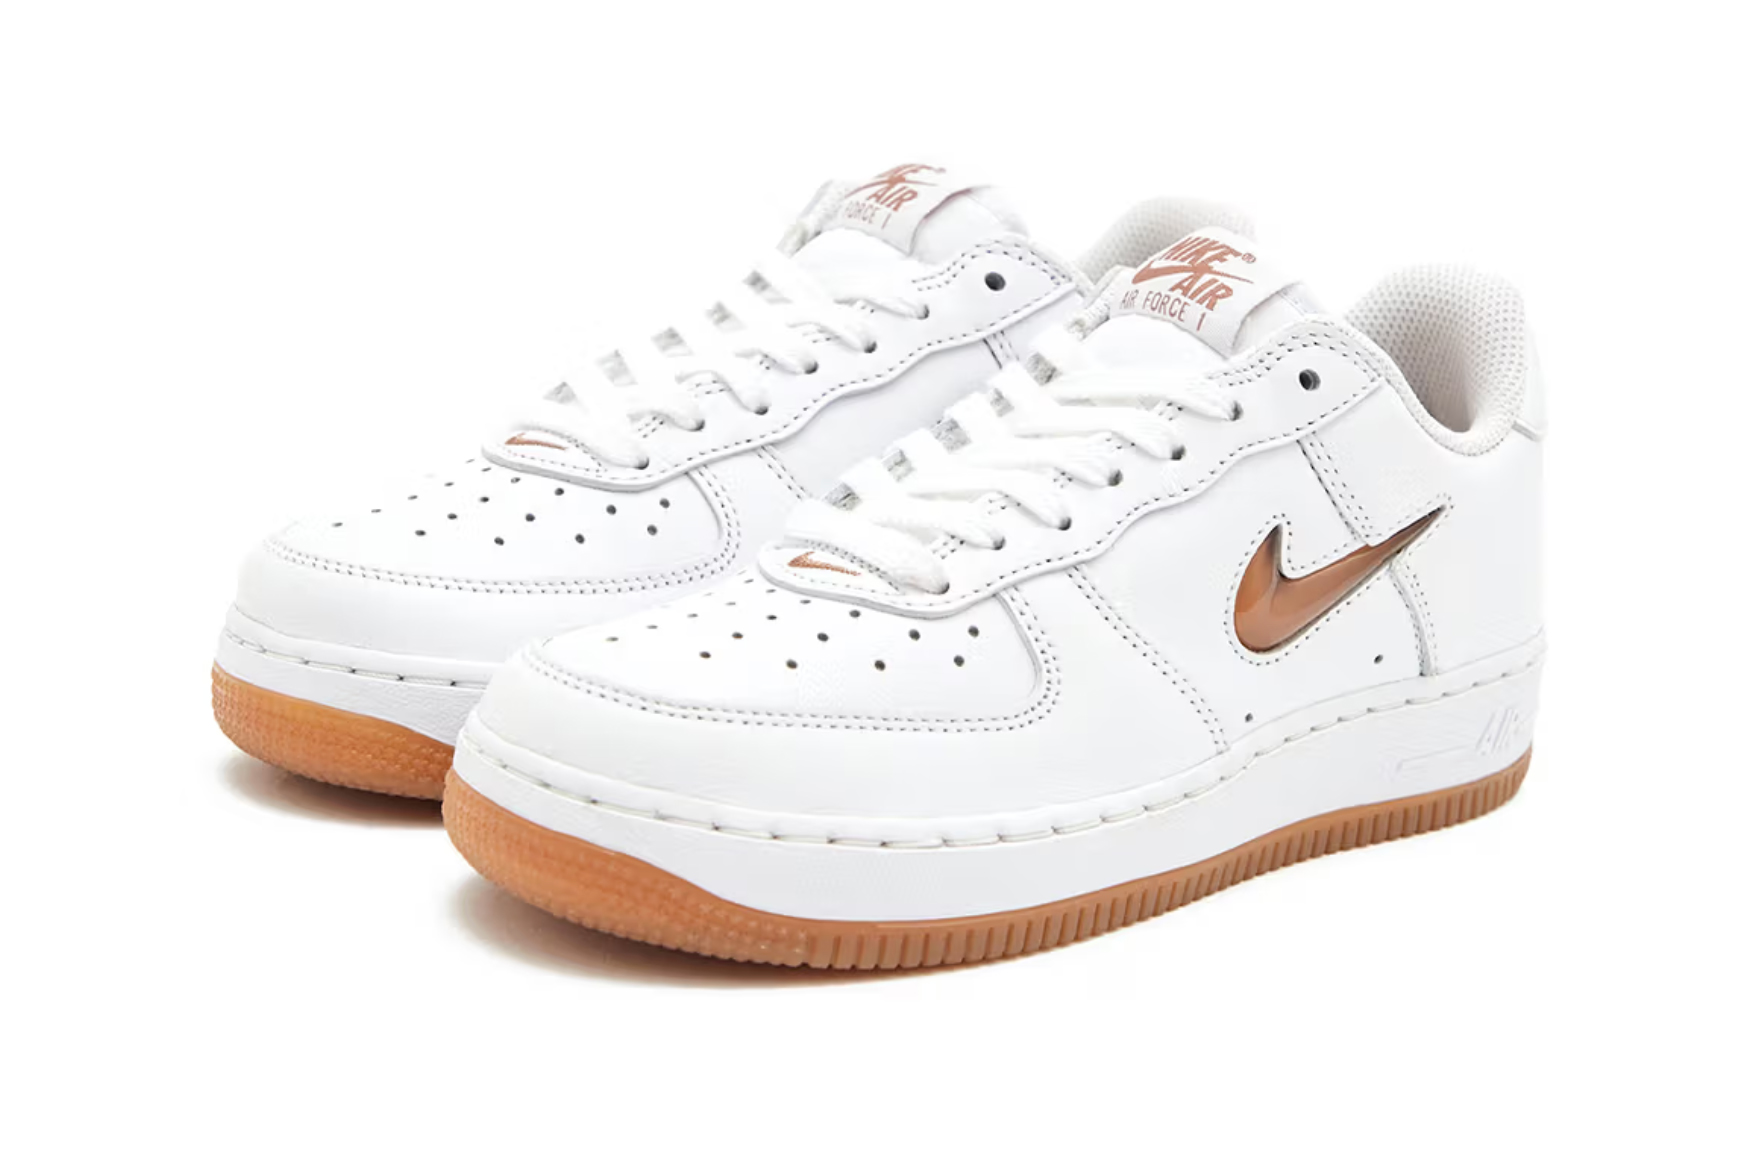 Nike Readies a “Gum” Air Force 1 Low Color of the Month Jewel